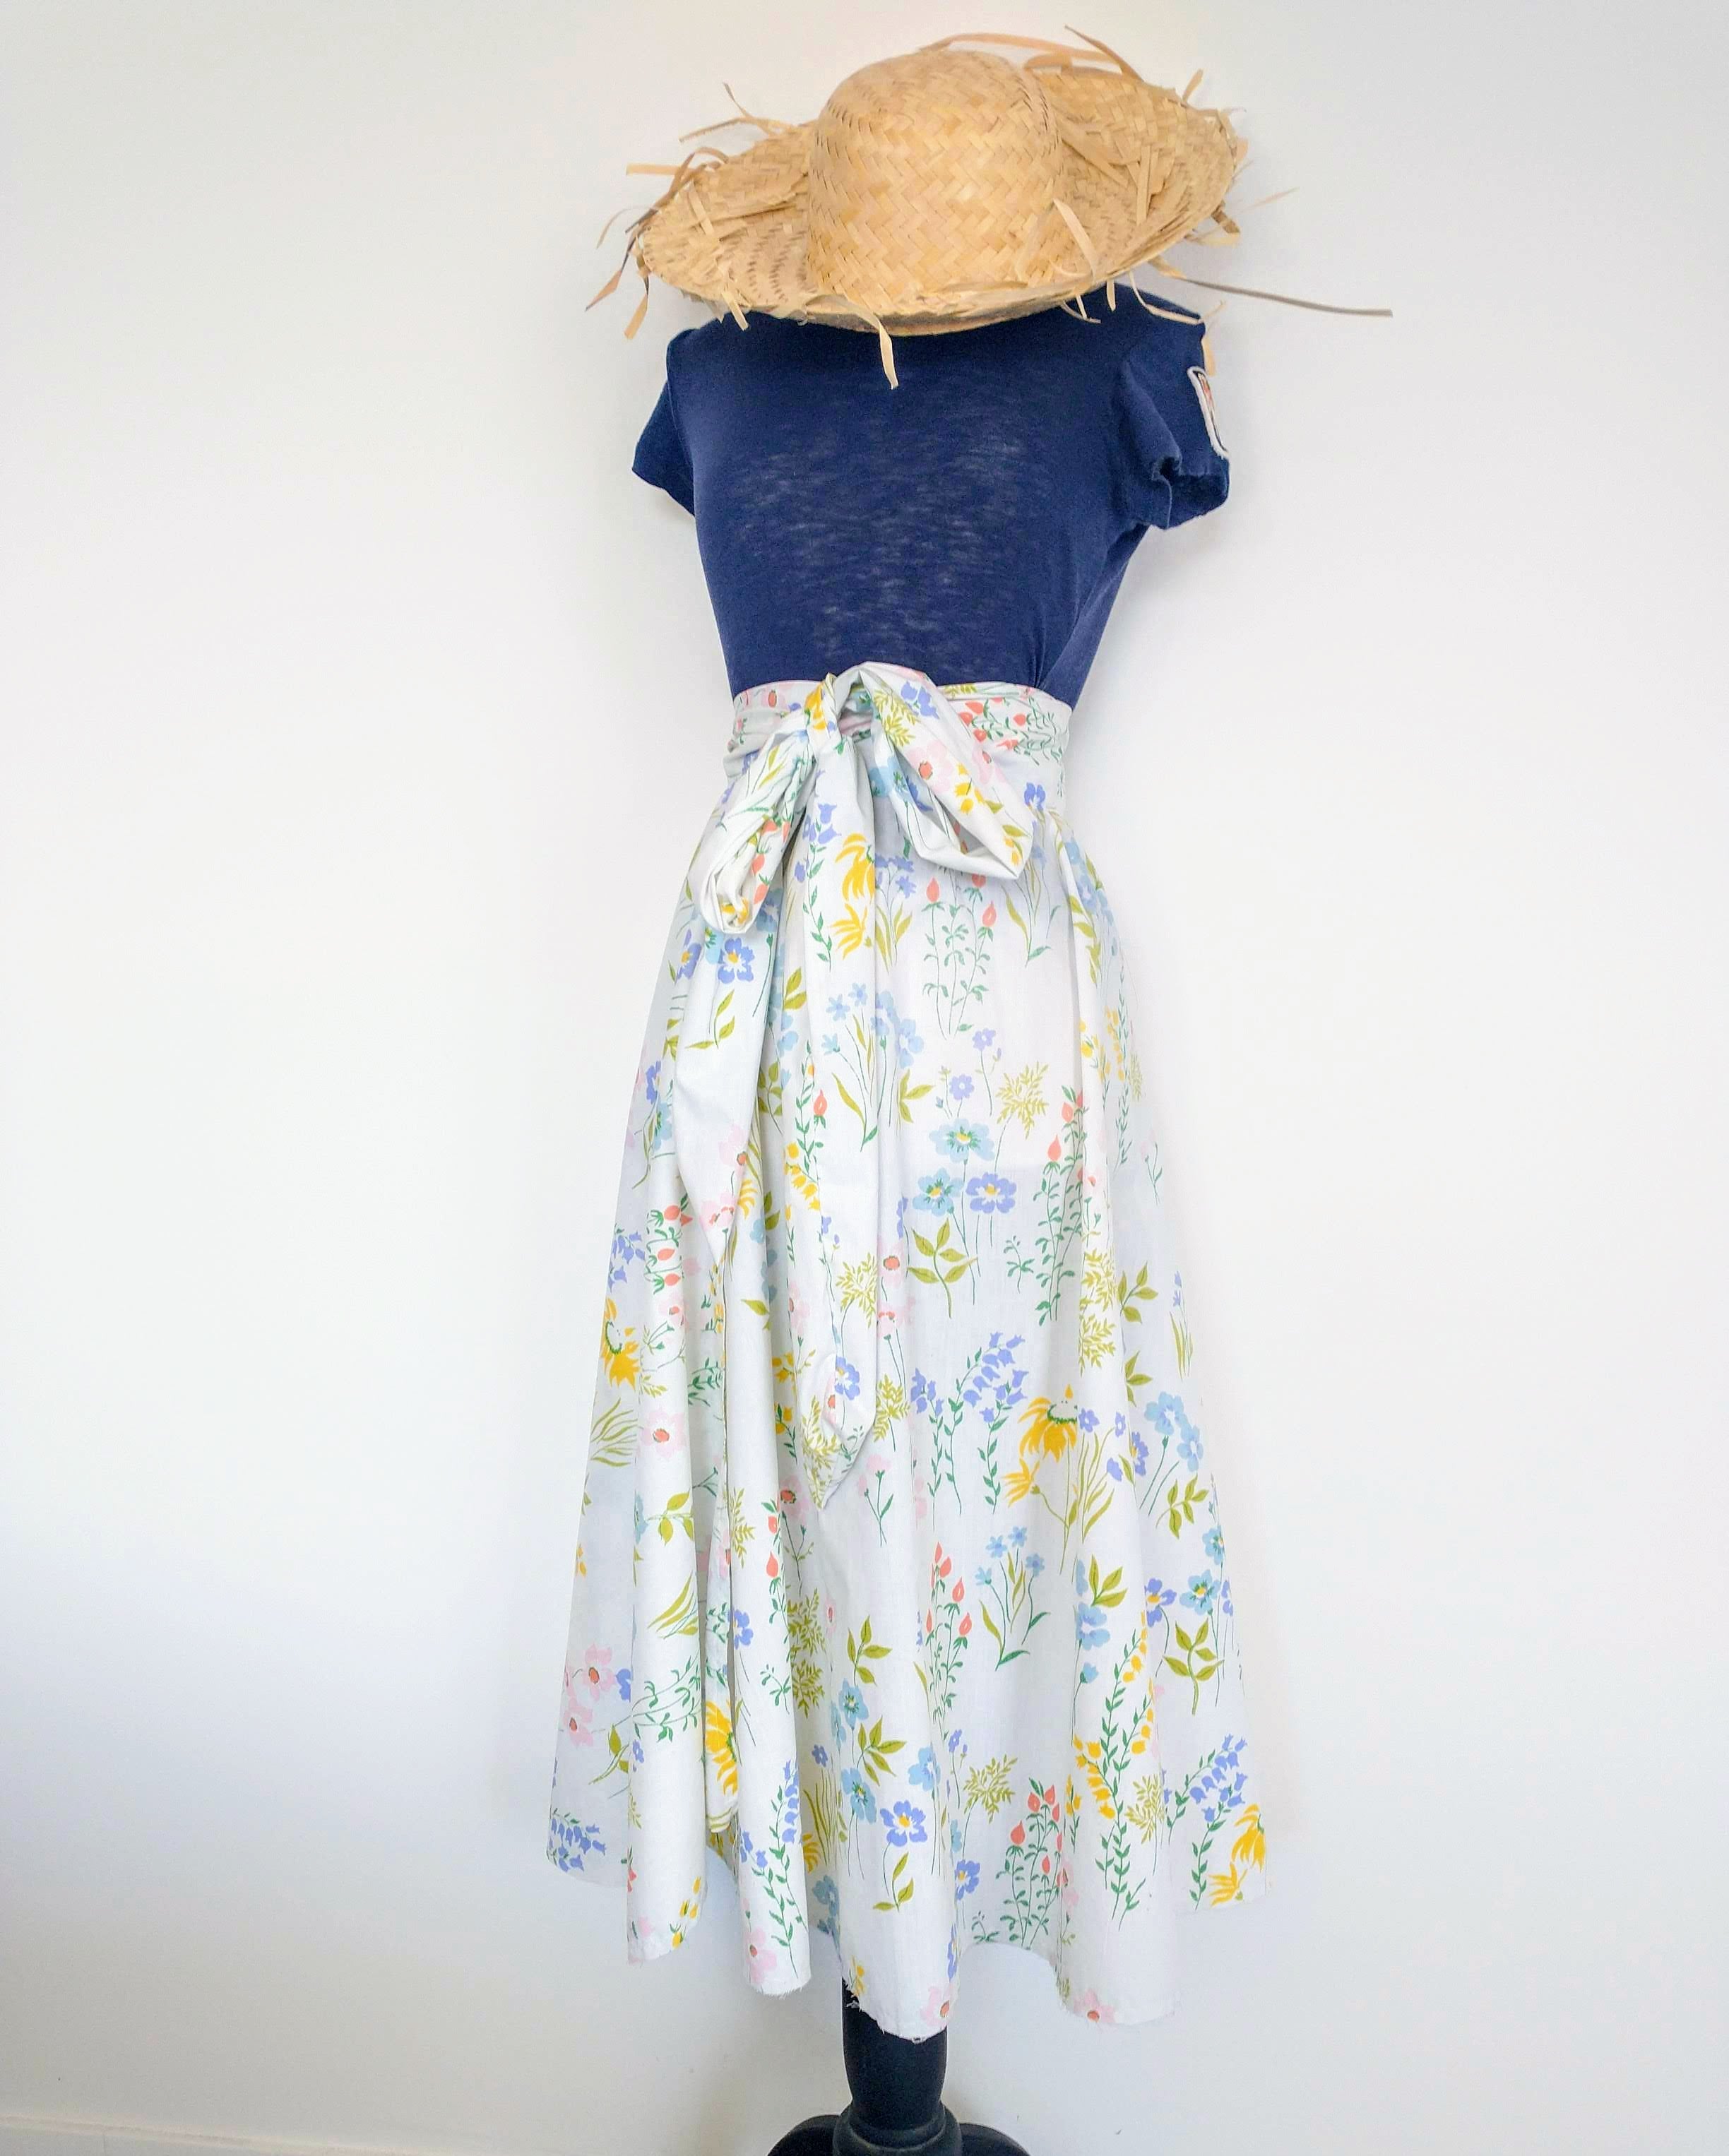 The SKIRT with tender flowers. Long wrap skirt. Upcycling. Unique size.